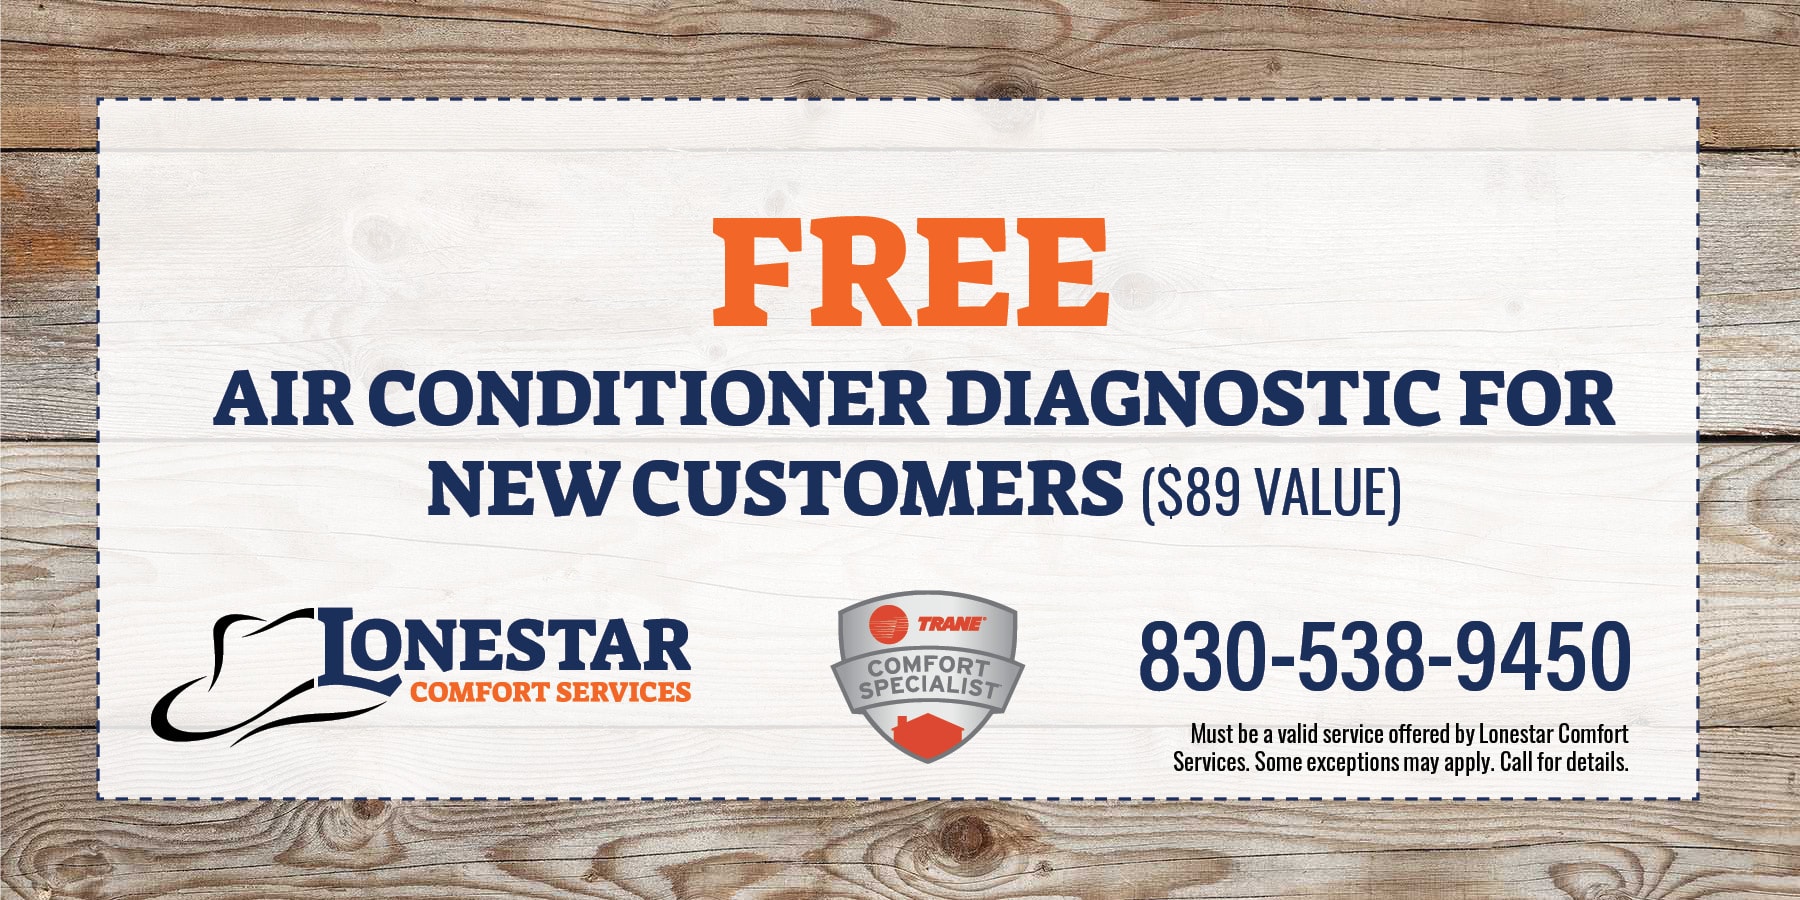 Free Air Conditioner Diagnostic for New Customers - Lonestar Comfort Services